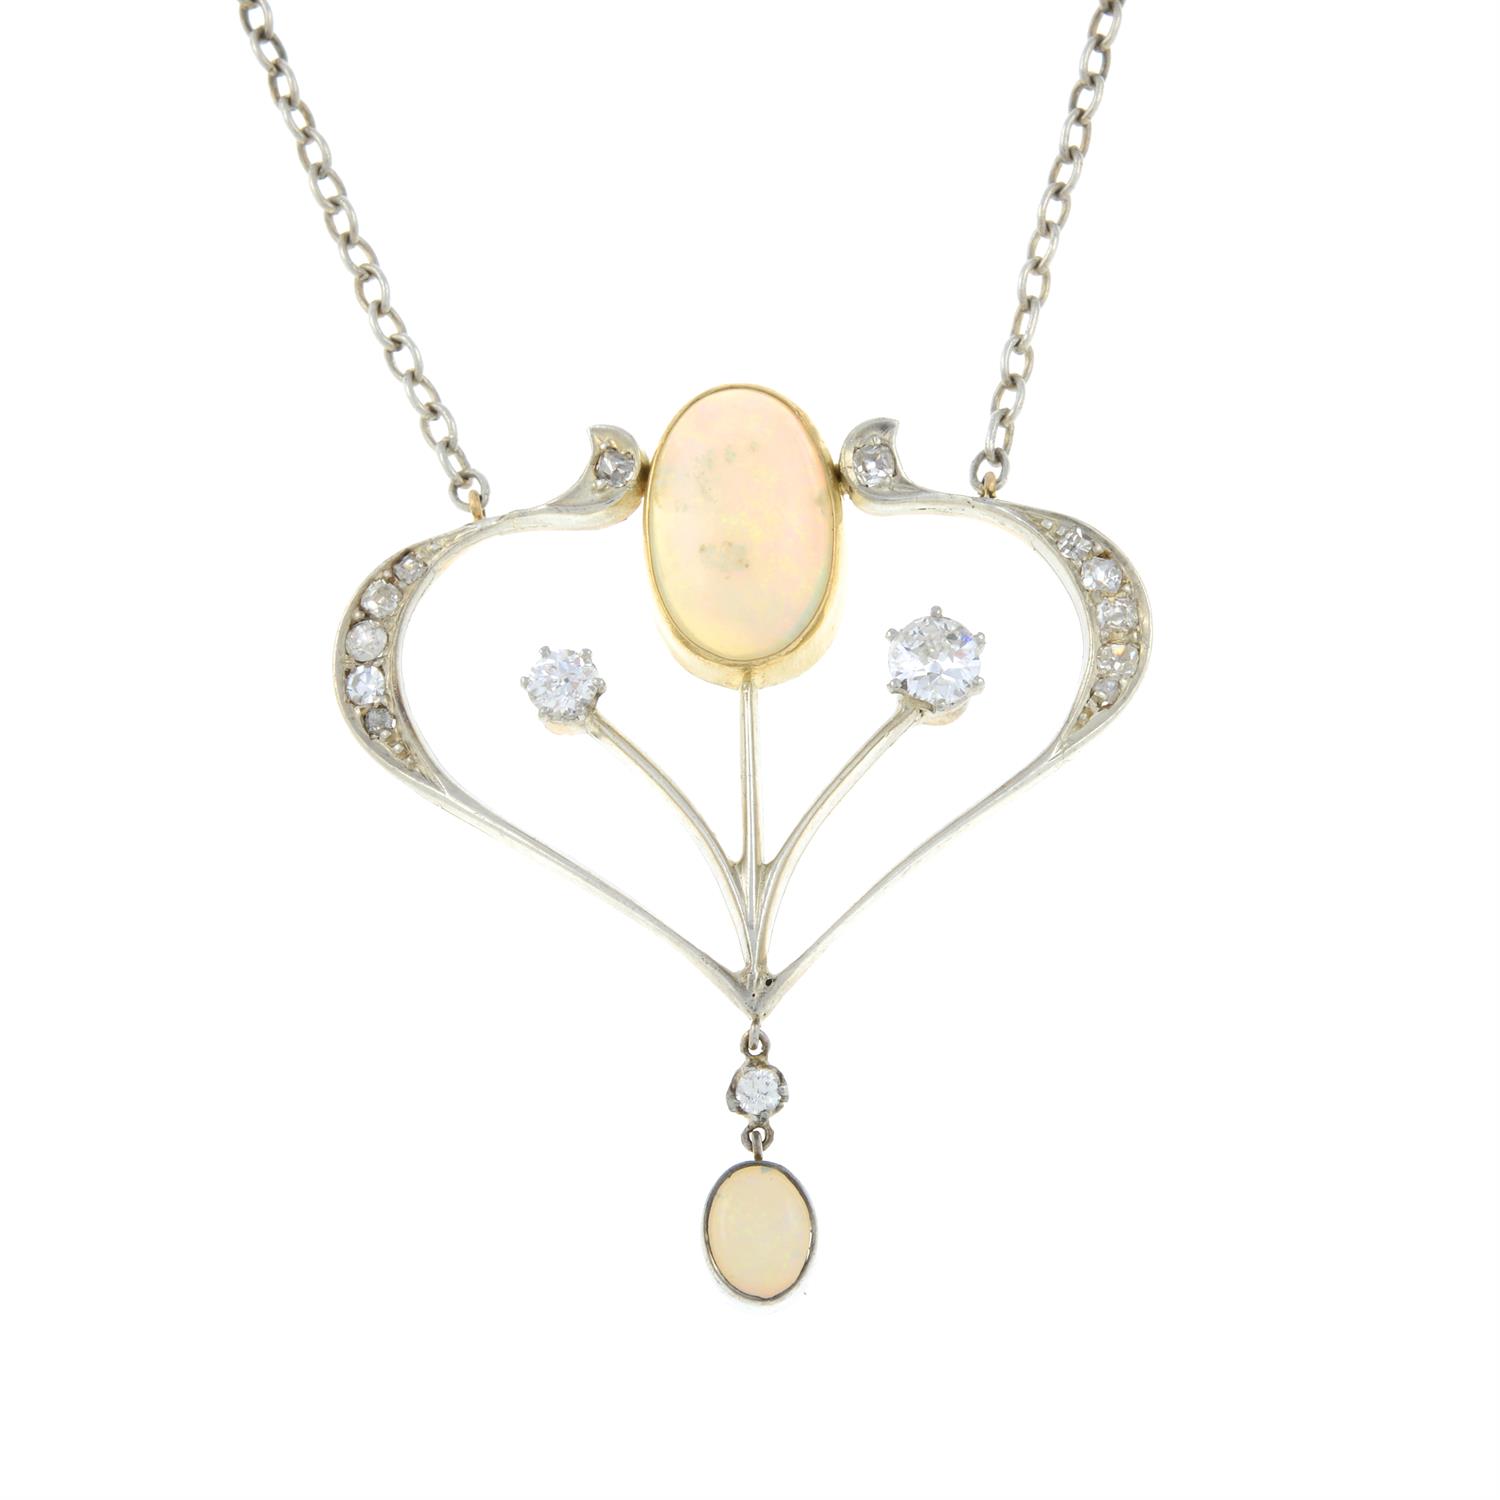 An early 20th century opal and old-cut diamond pendant necklace.